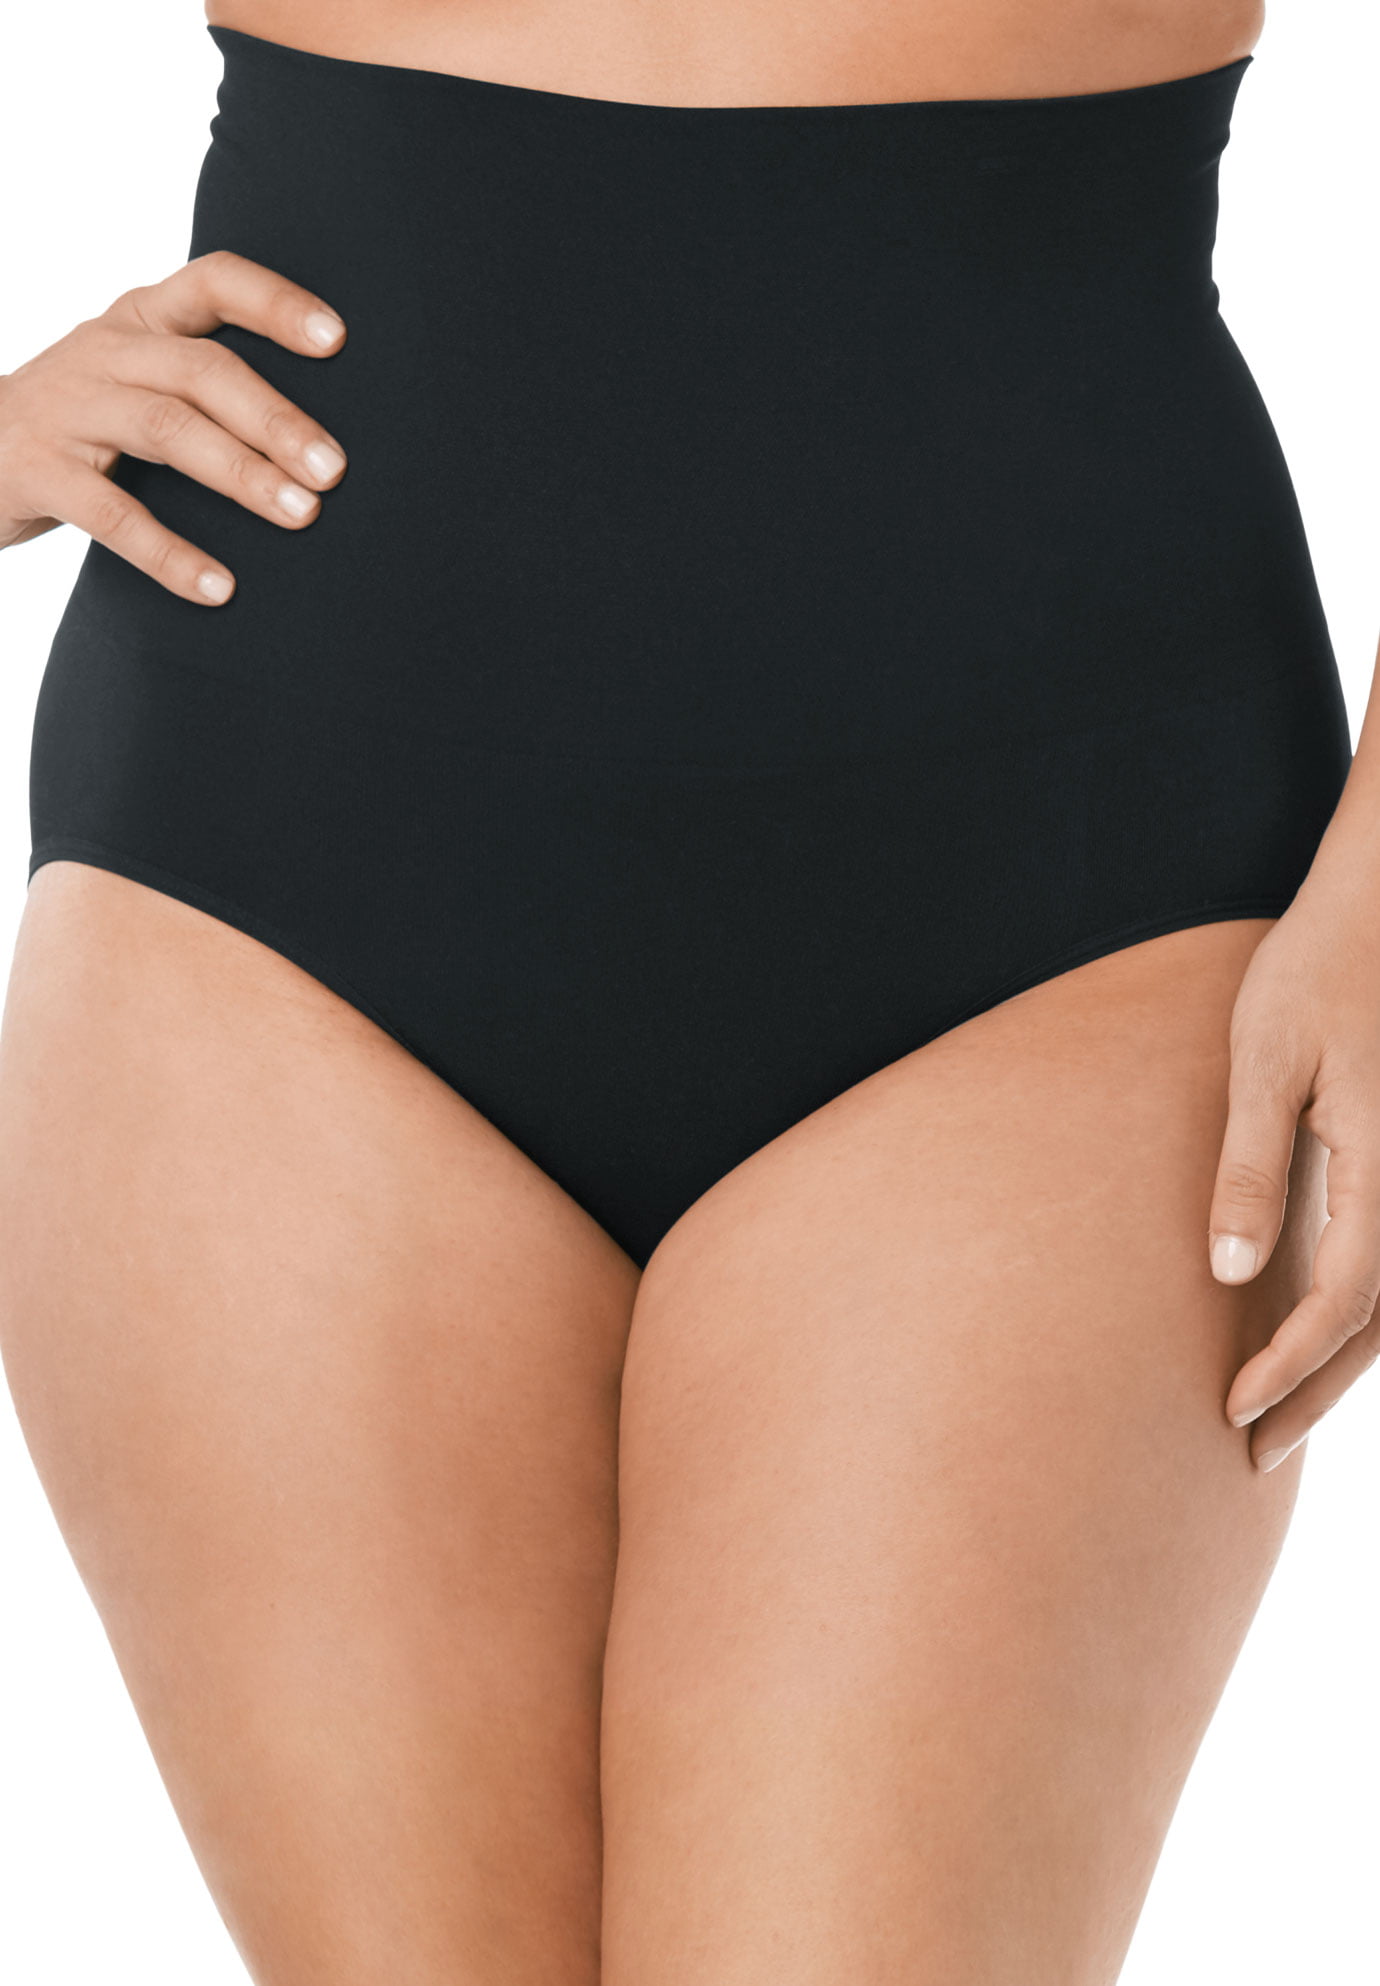 Secret Solutions Womens Plus Size High Waist Shaping Brief